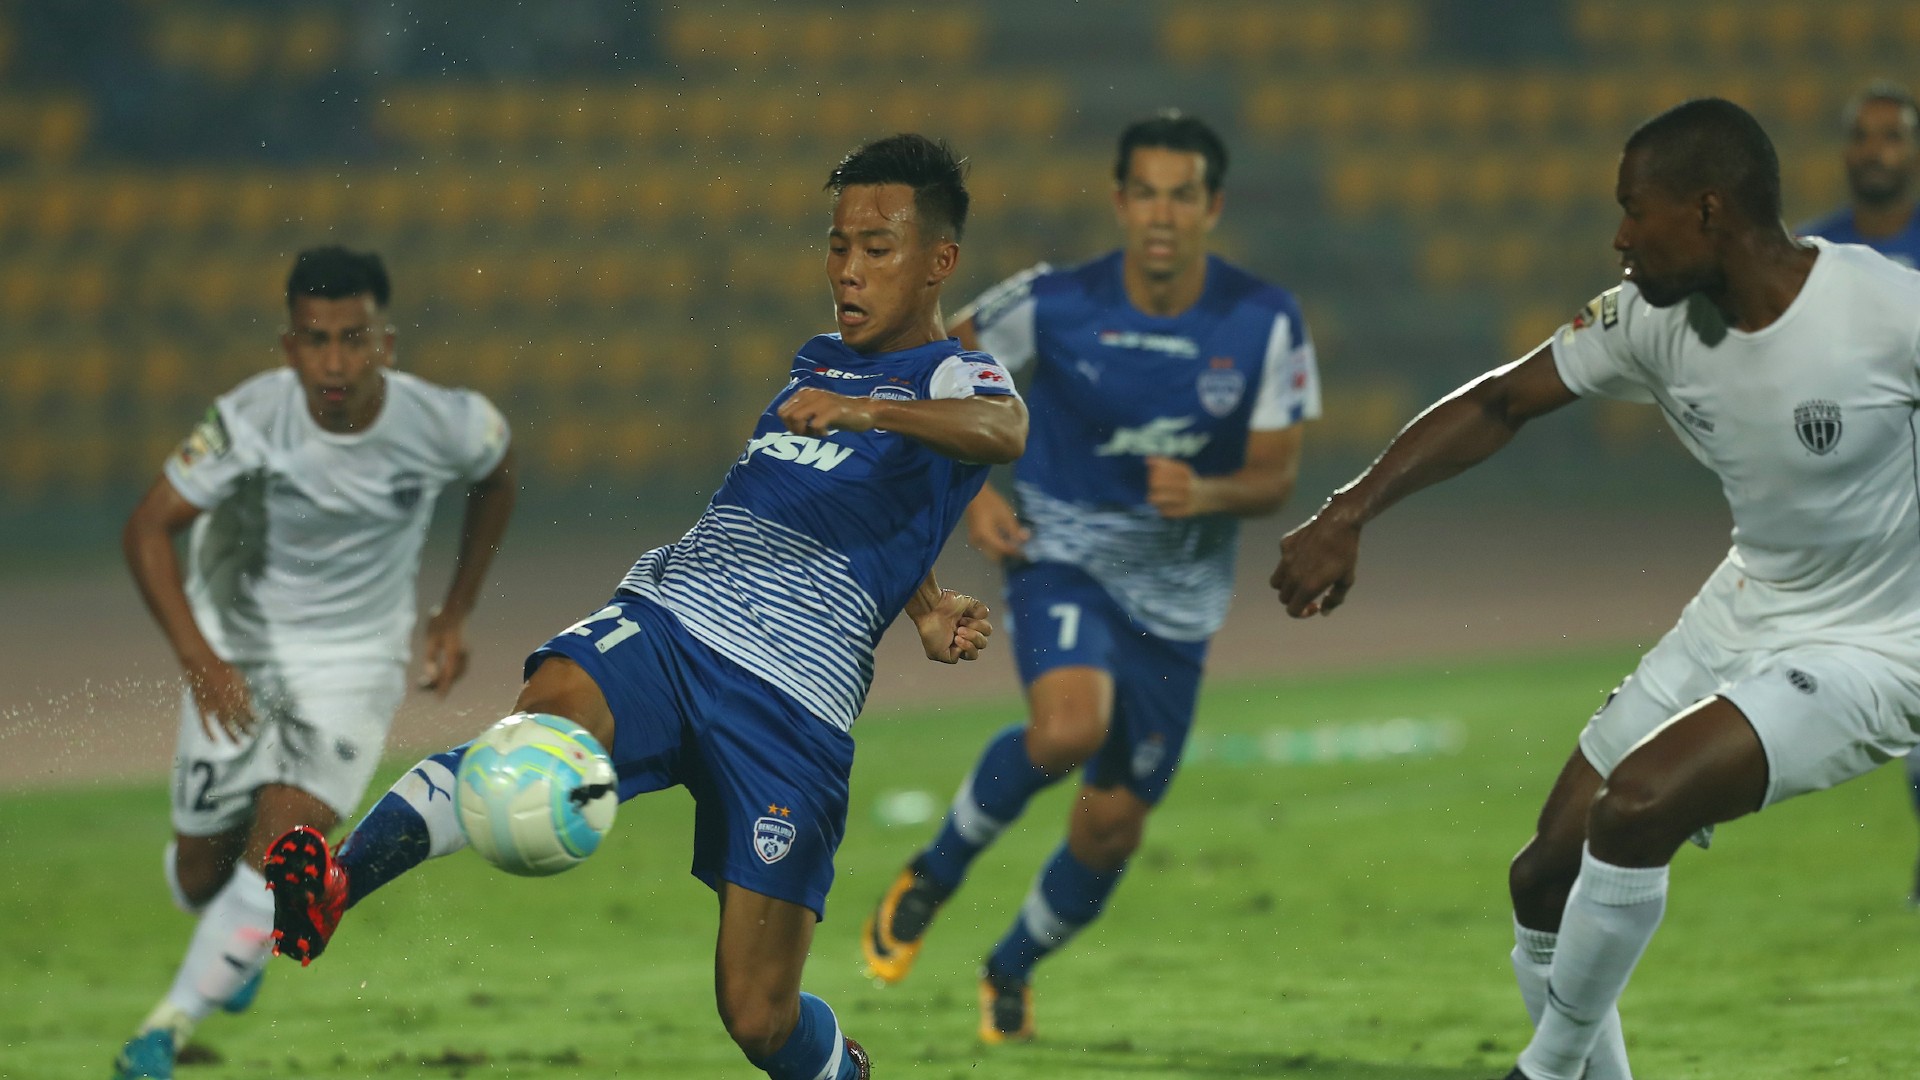 Former Bengaluru FC striker Miku - Udanta Singh can play at the top level in Asia